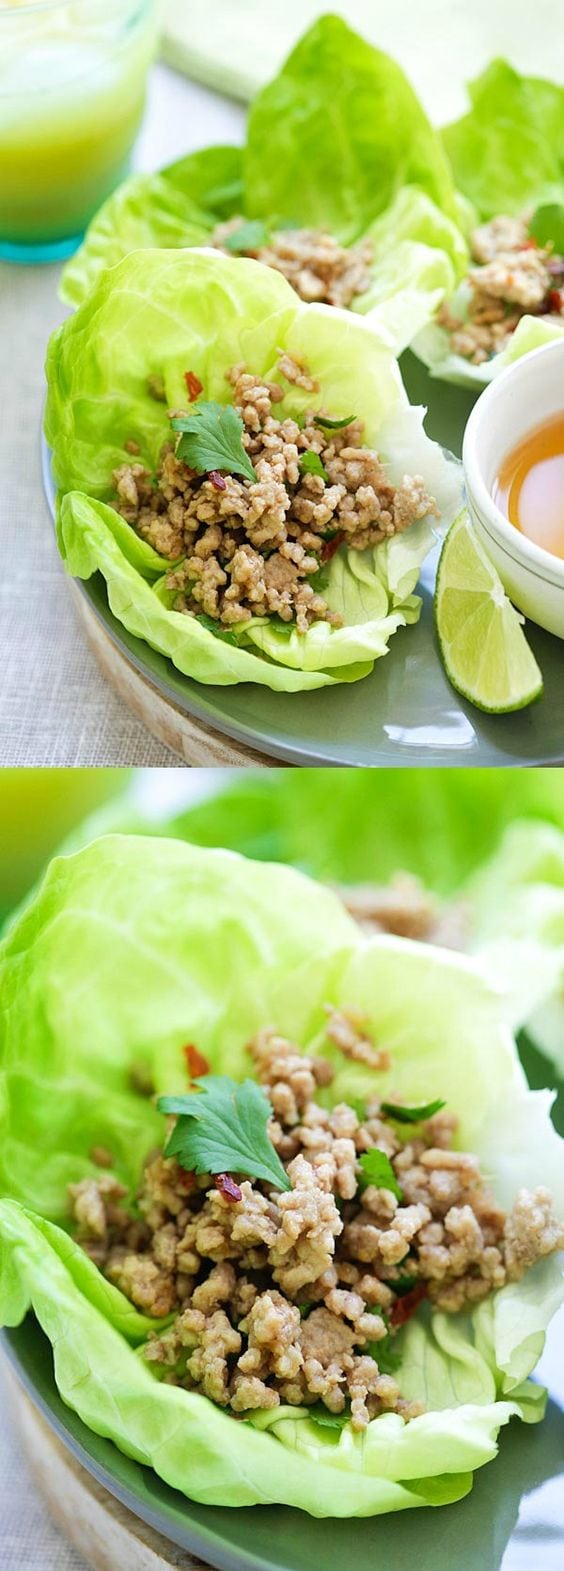 Pork Larb Lettuce Wrap - healthy and delicious Thai ground pork lettuce wraps with a savory, sweet and mildly spicy dipping sauce. So good | rasamalaysia.com